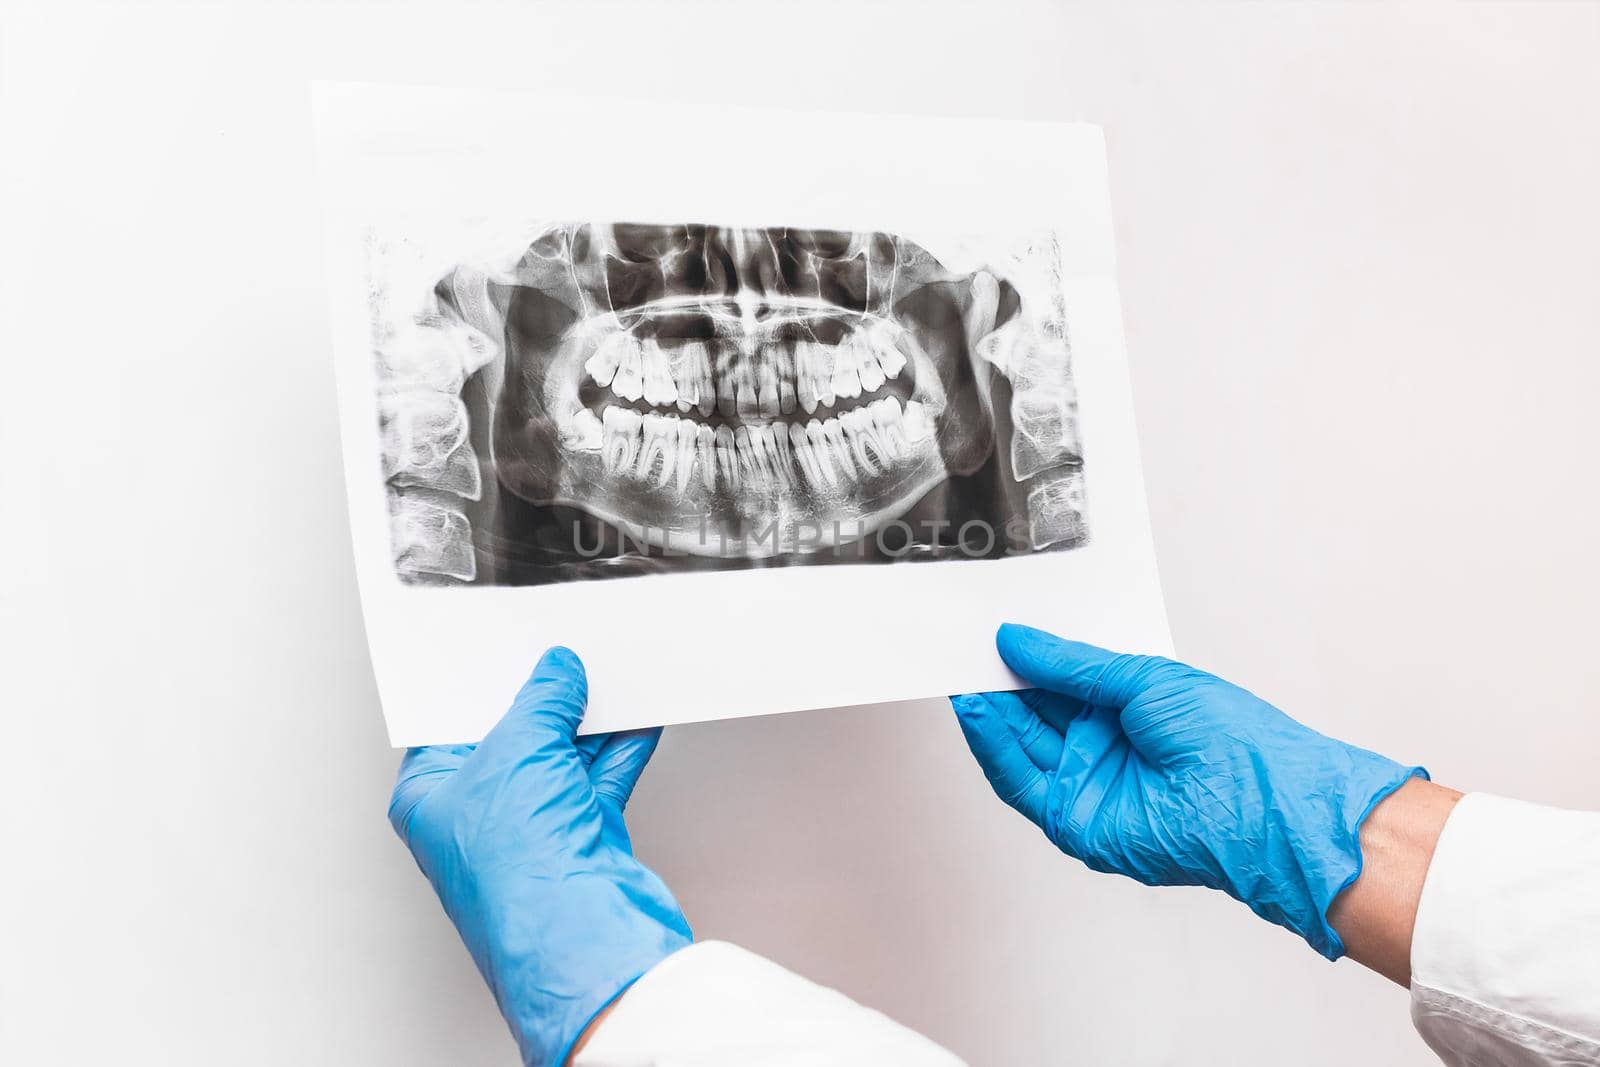 Doctor's hands in protective medical gloves are holding and examining an x-ray picture of teeth on a white background.